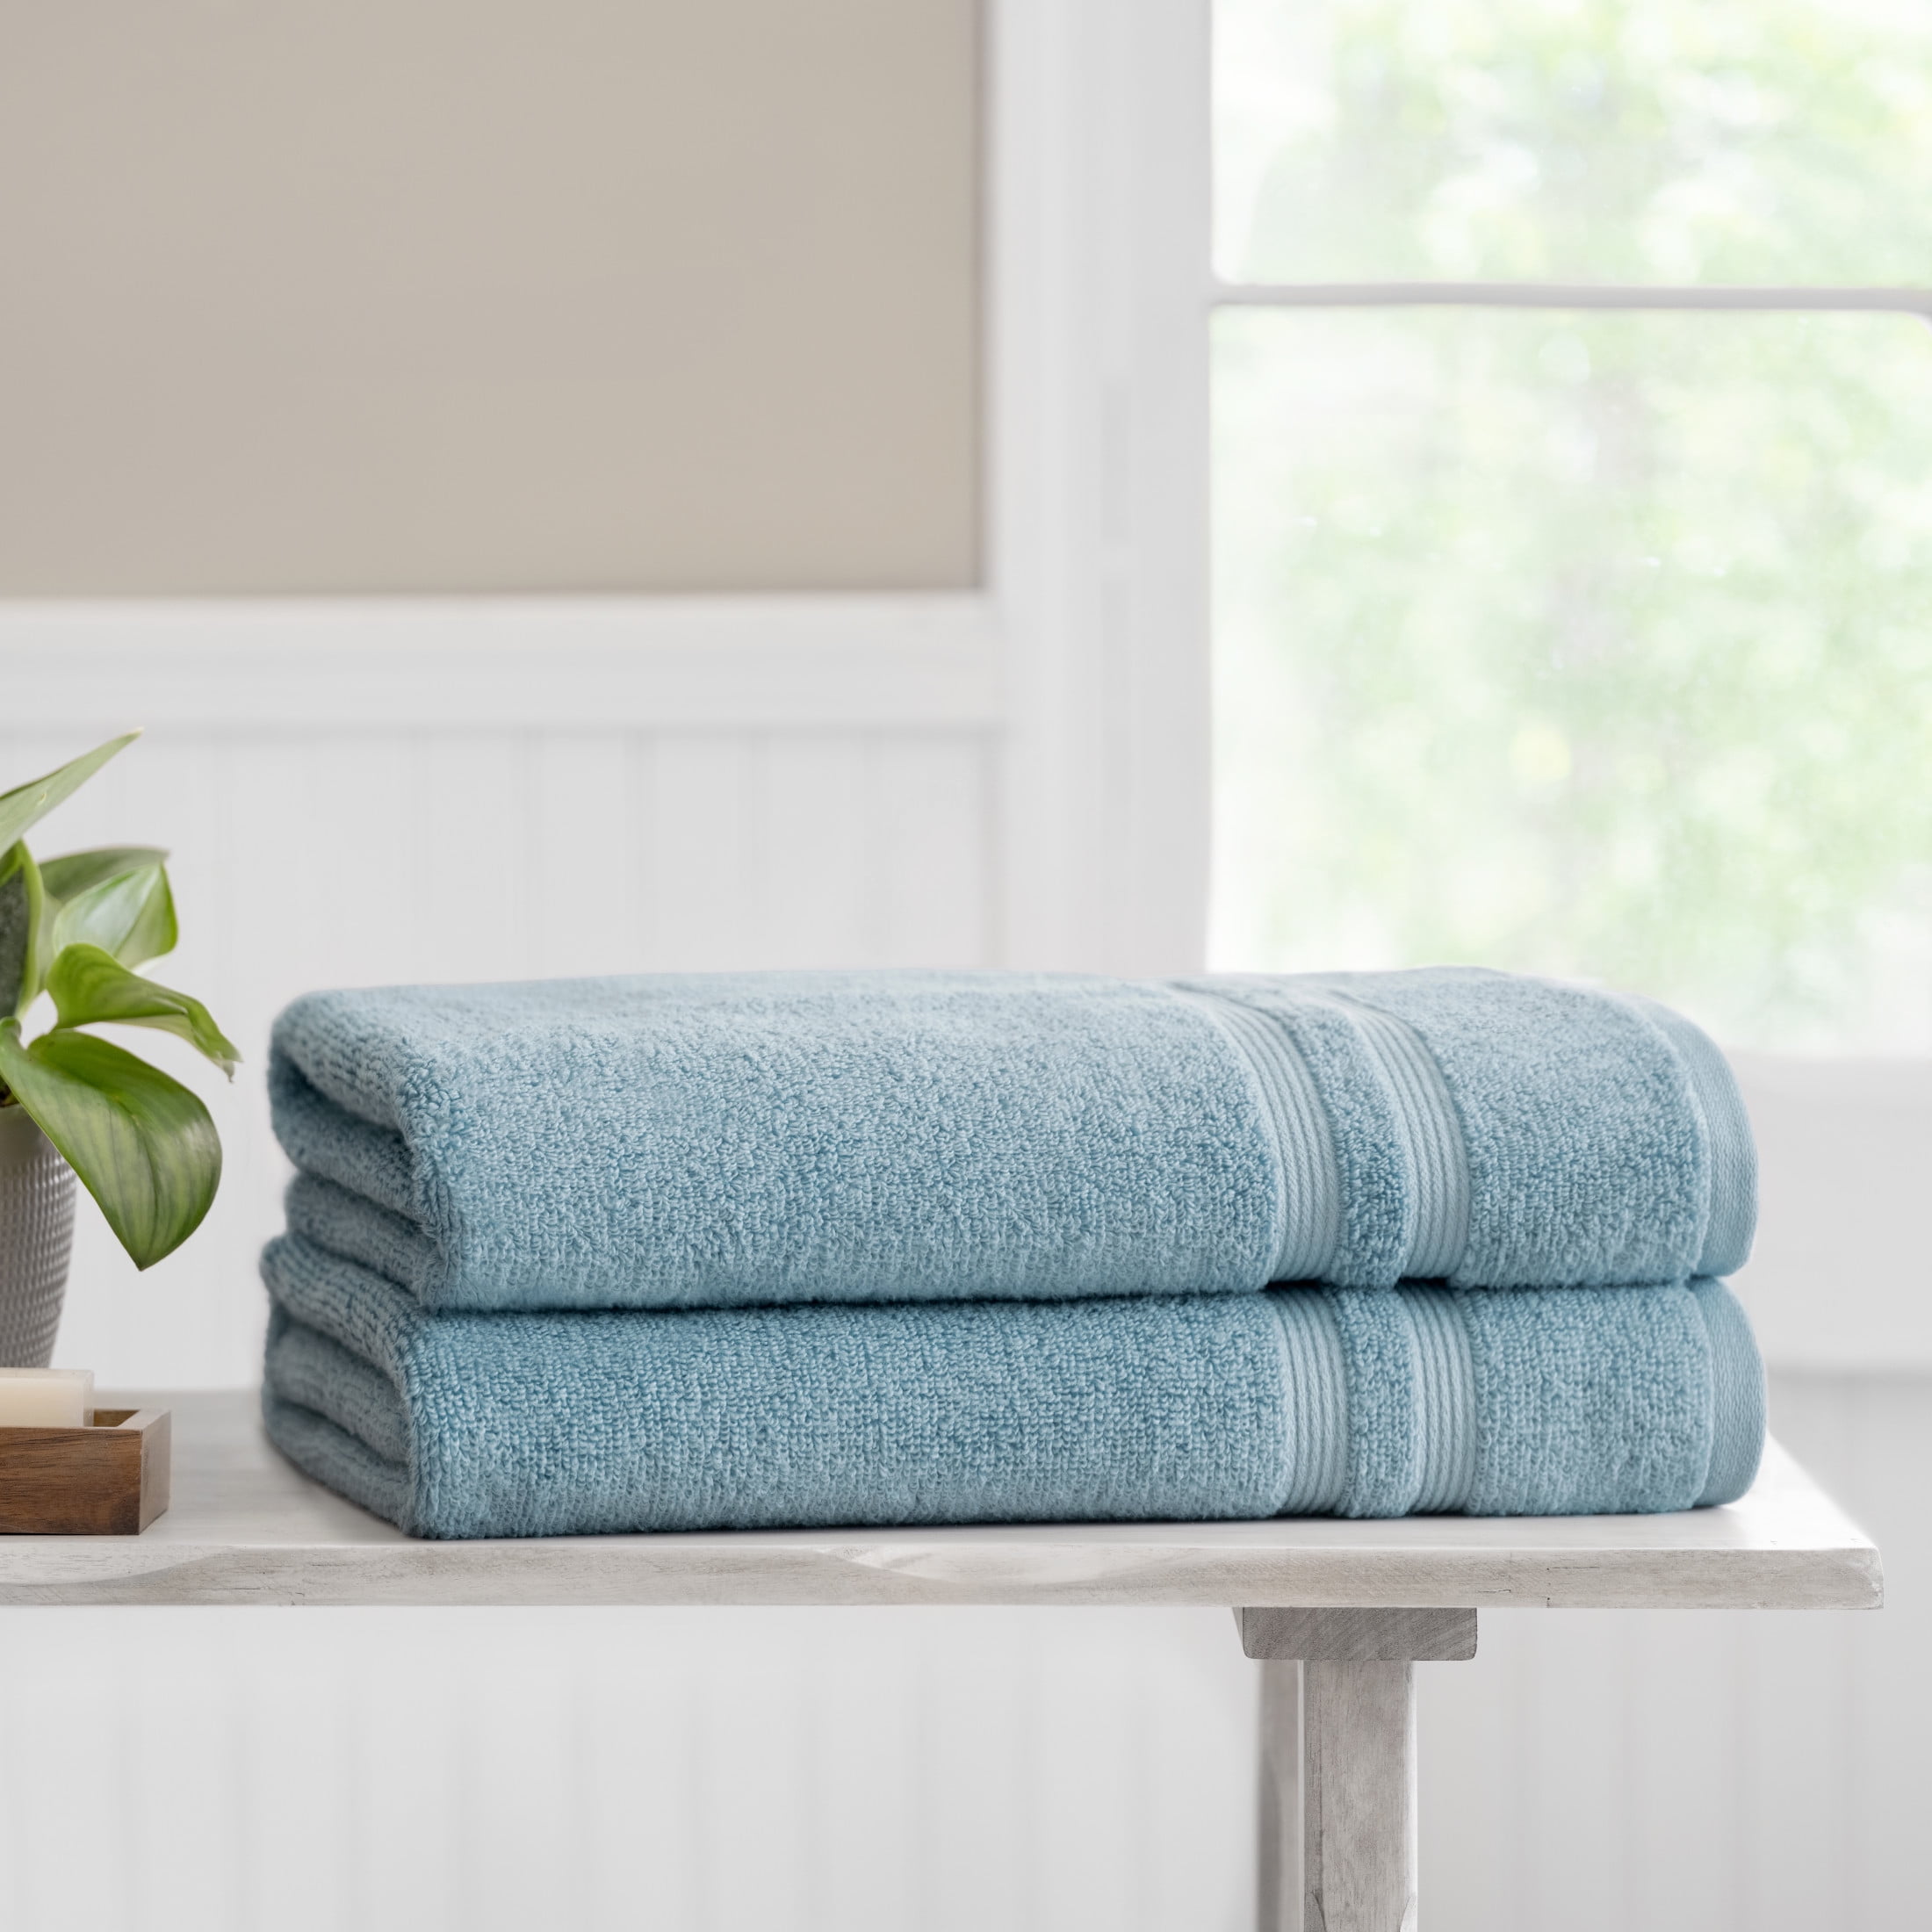 Linen Bath Towel Set / Towels for Her and for Him / Heavy Weight Towels Soft  Rough Linen Towels / Blue White Towels / Large Towels 